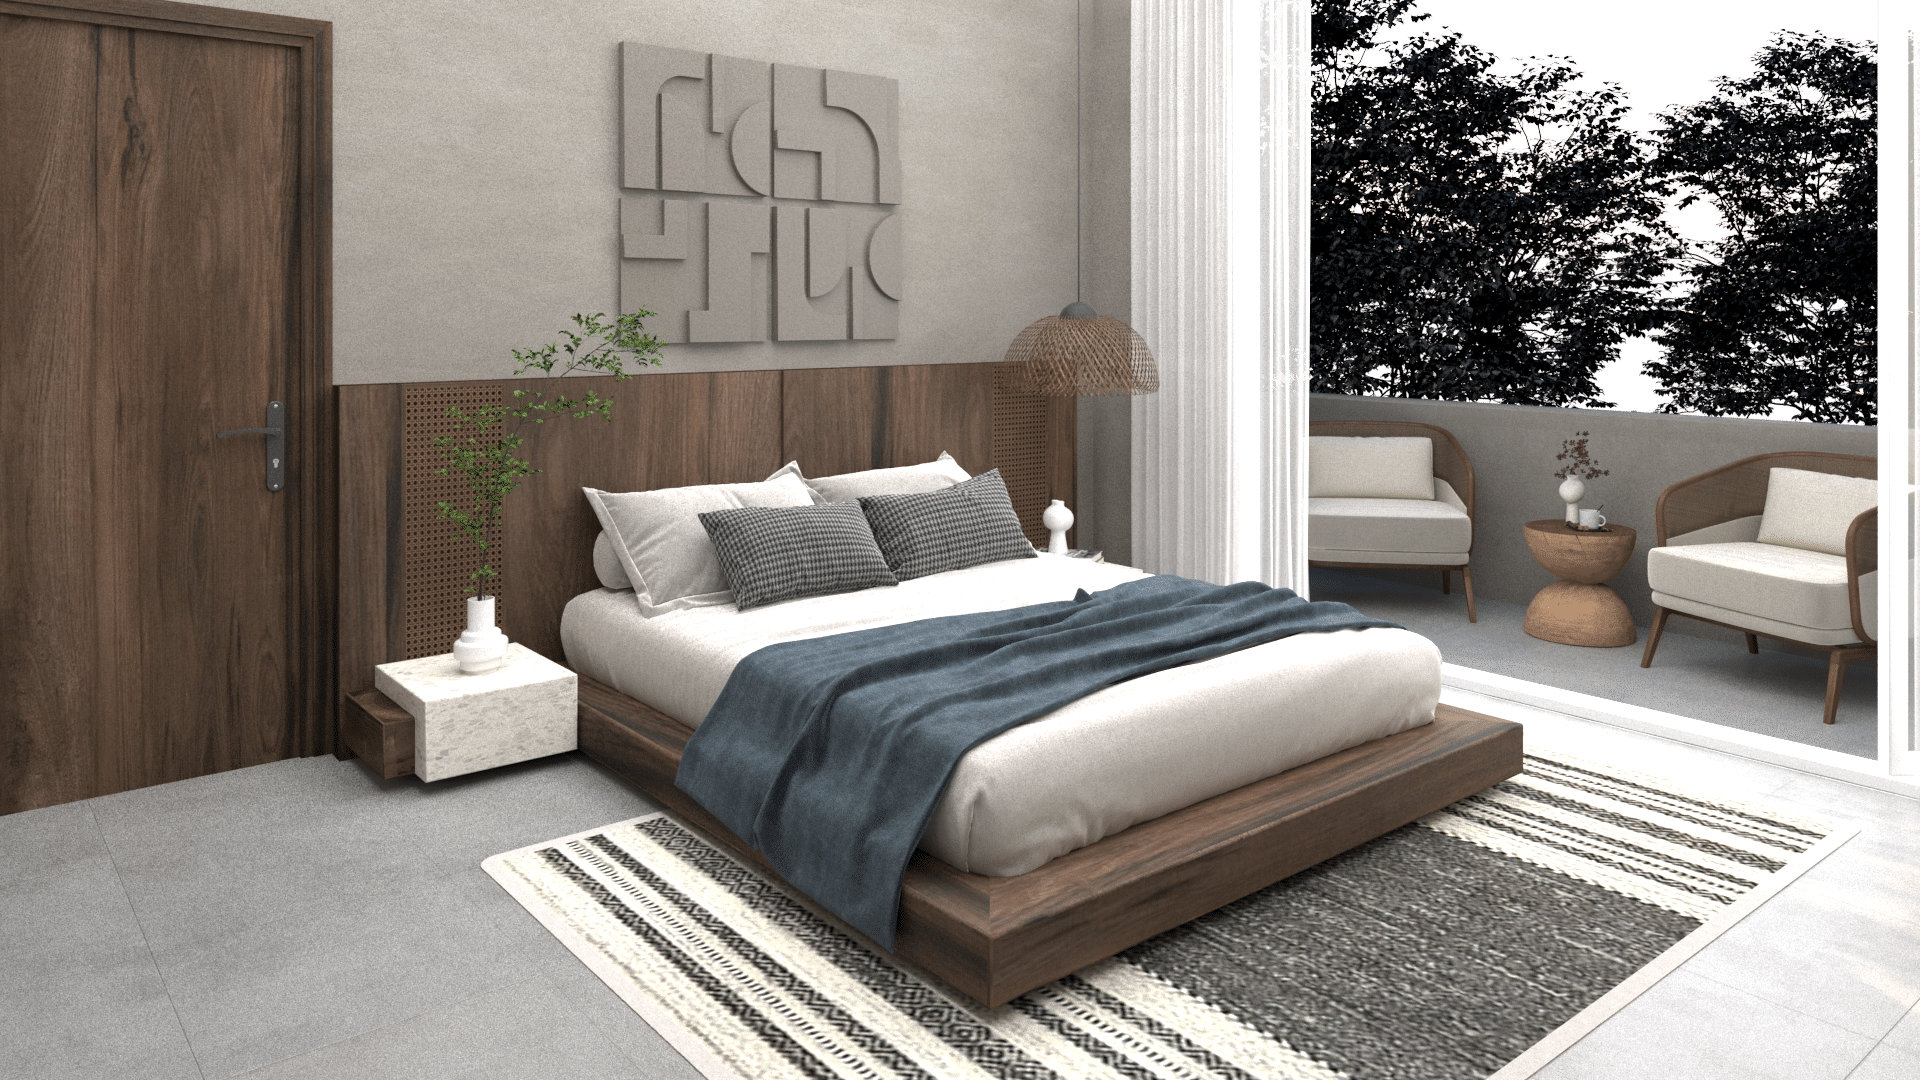 Modern Bedroom Design With Balcony View